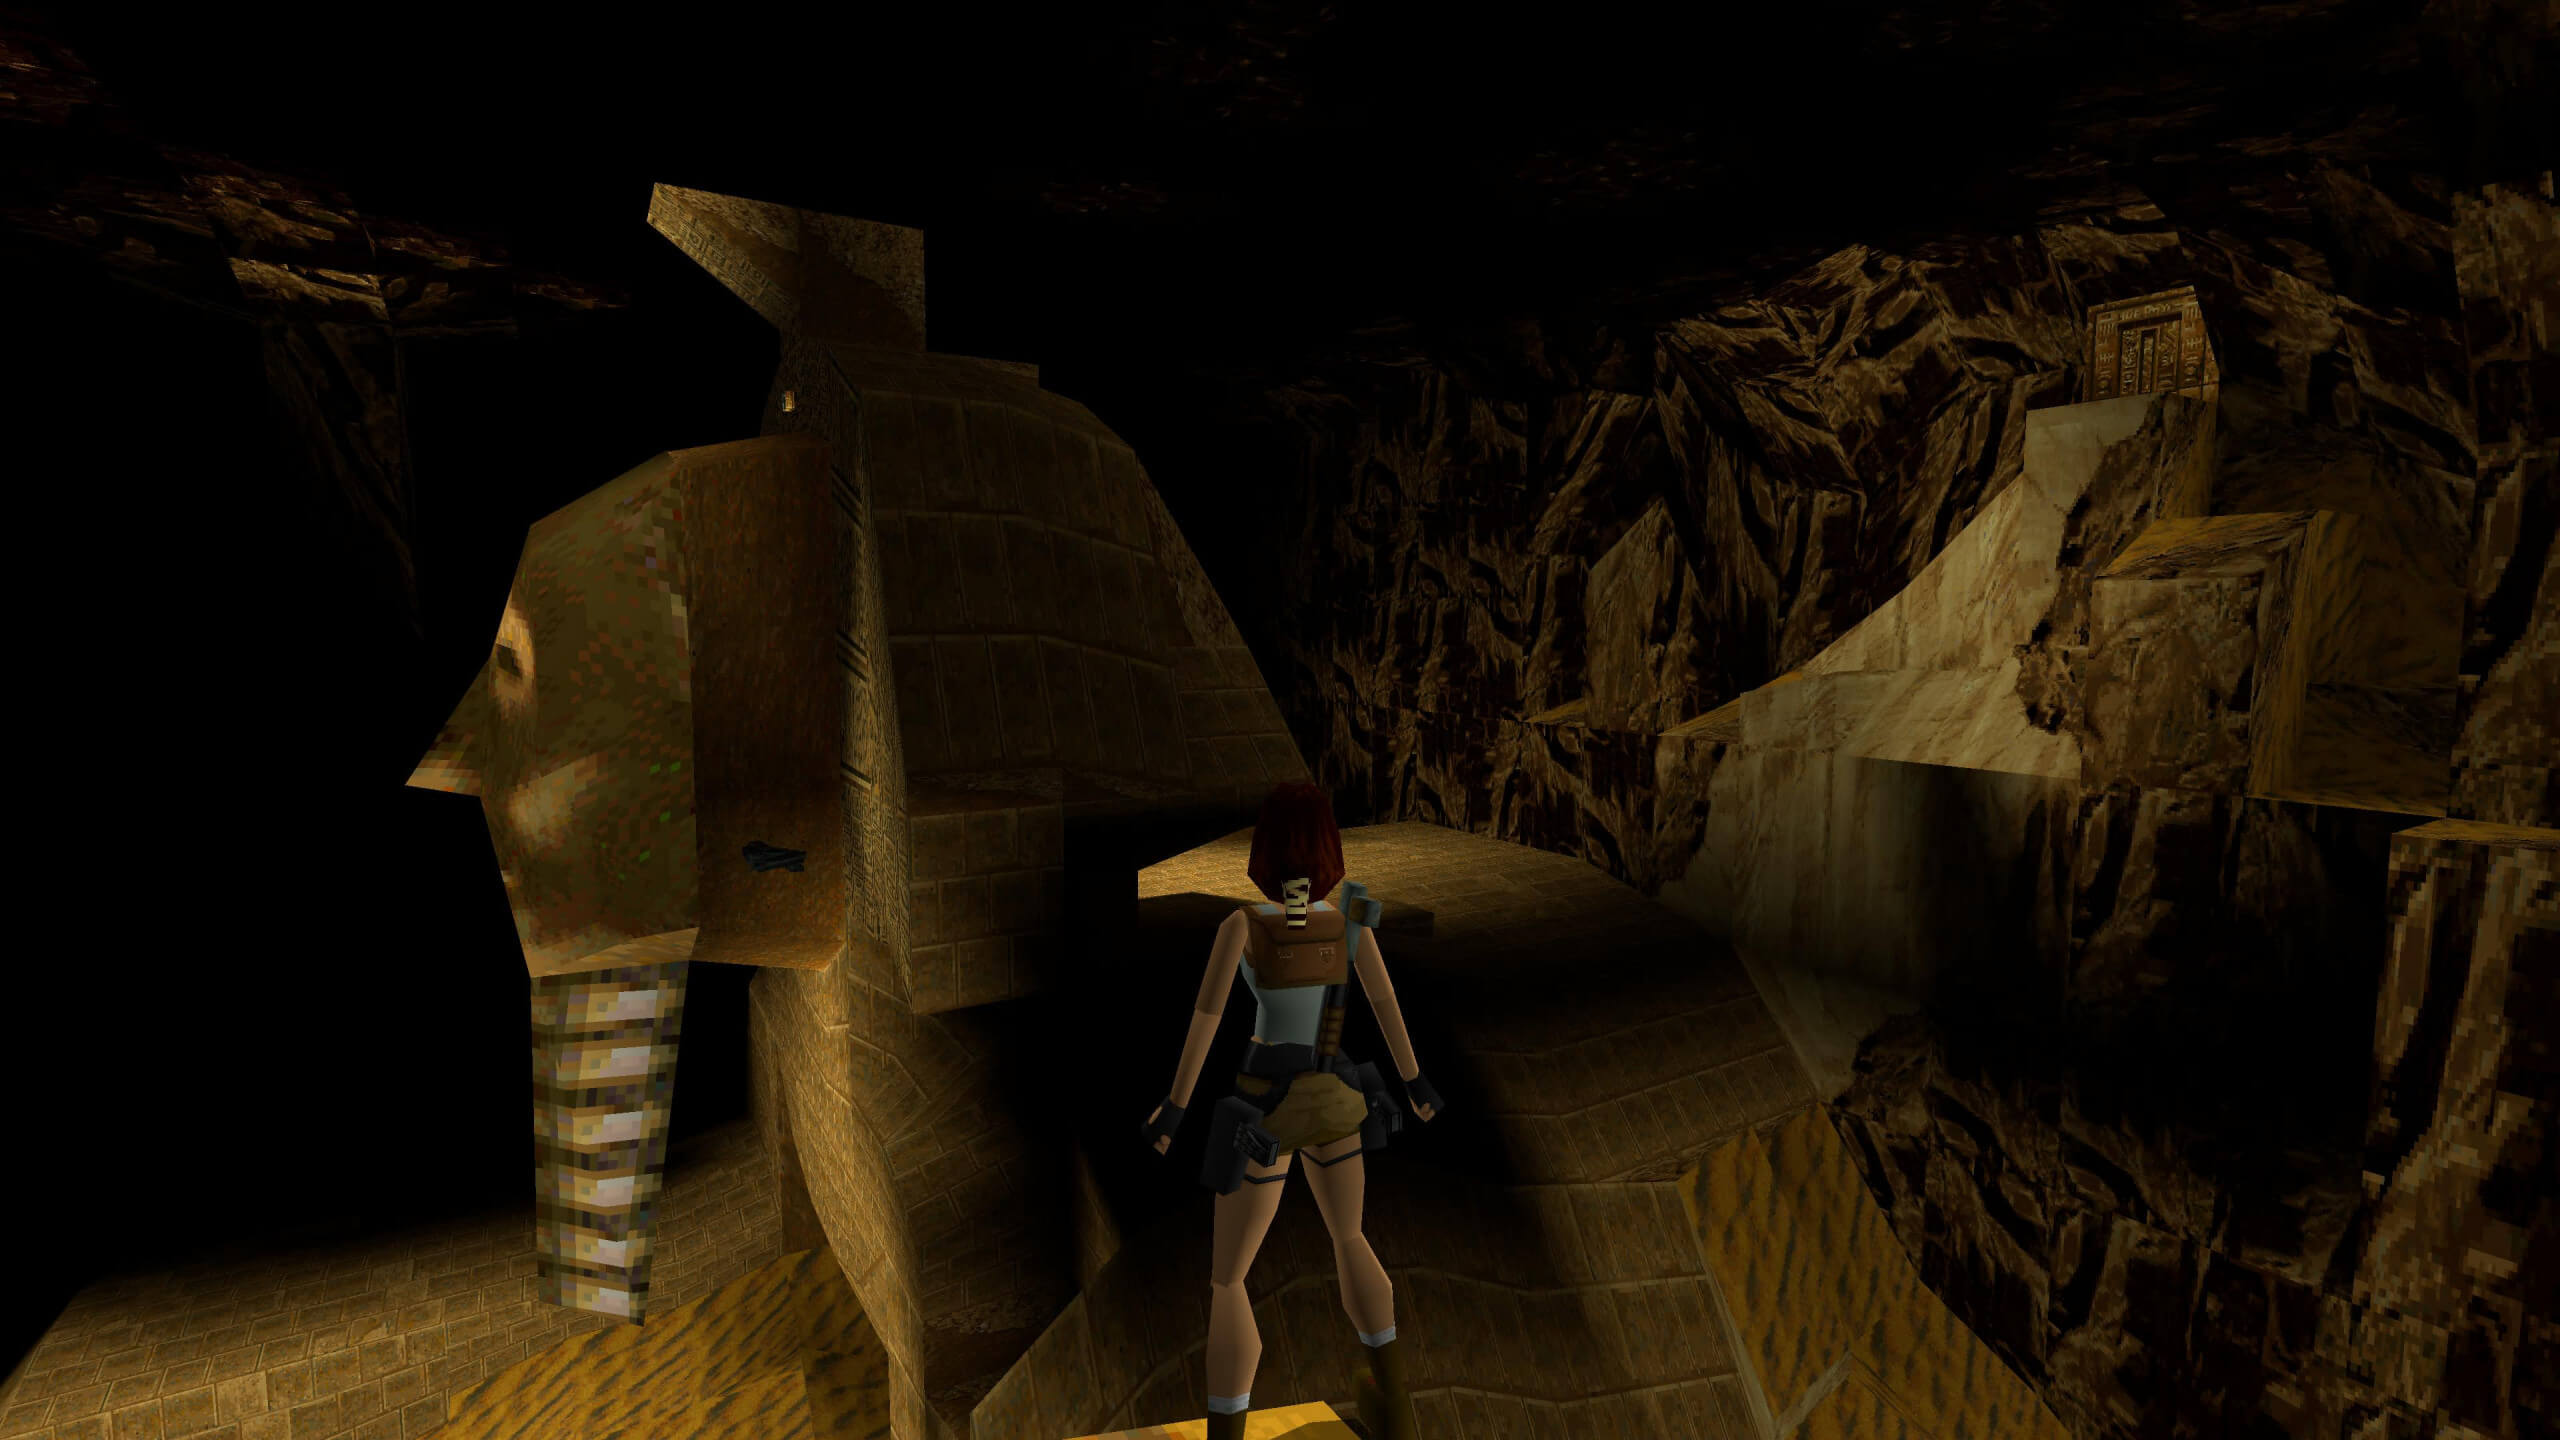 Lara stands on a ledge in the middle of an Egyptian ruin. Floating in the air in front of her is a pair of Uzis, one of the final secrets in this chapter